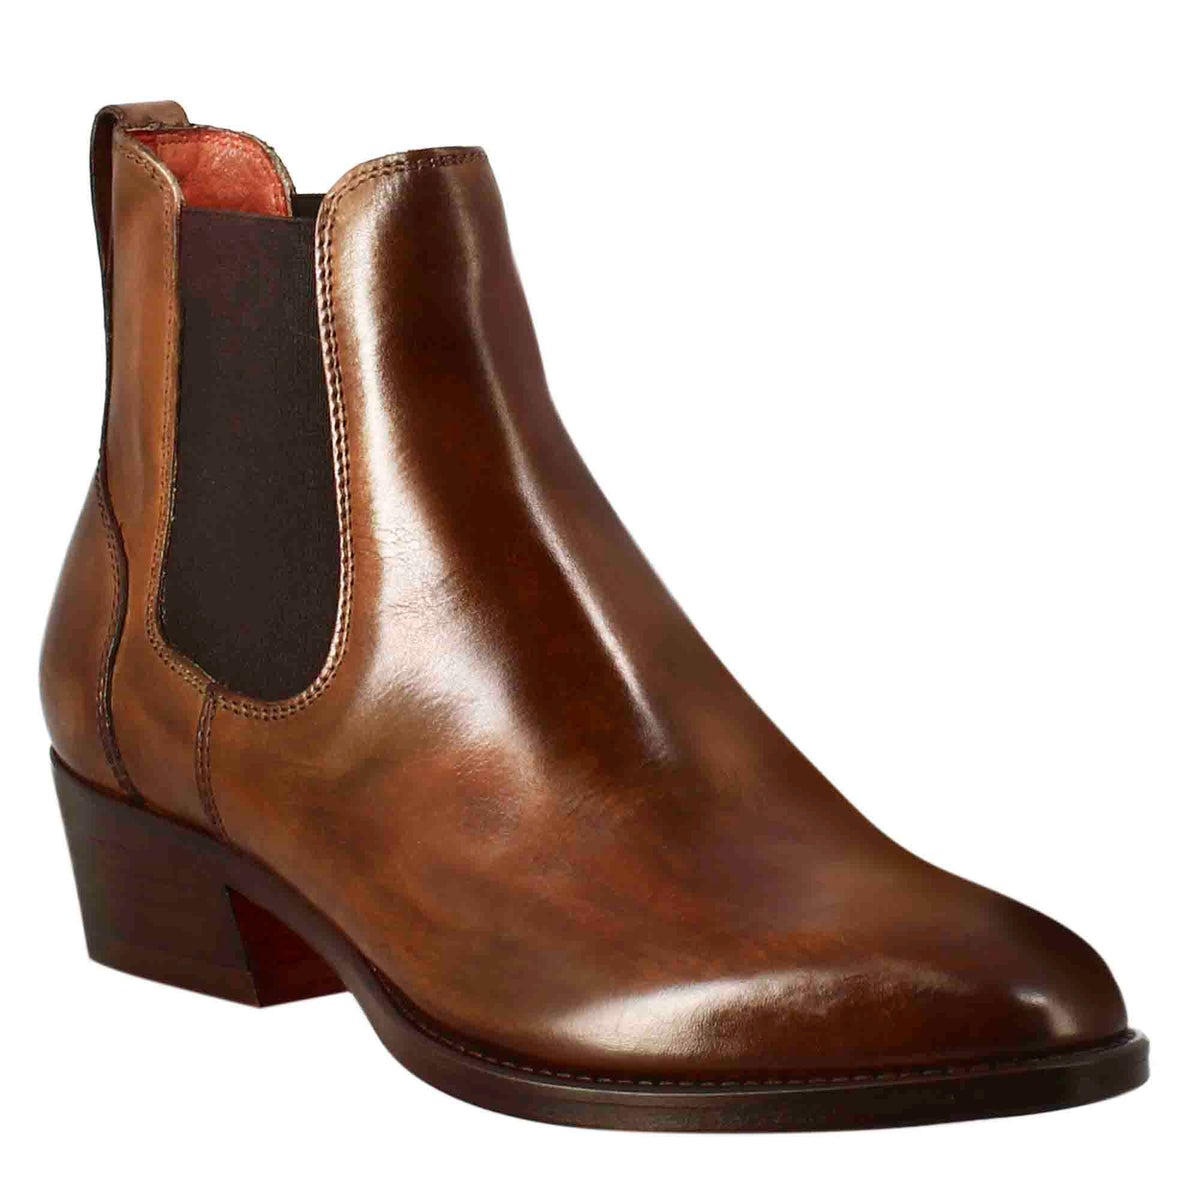 Smooth women's Chelsea boot with medium heel in brown leather